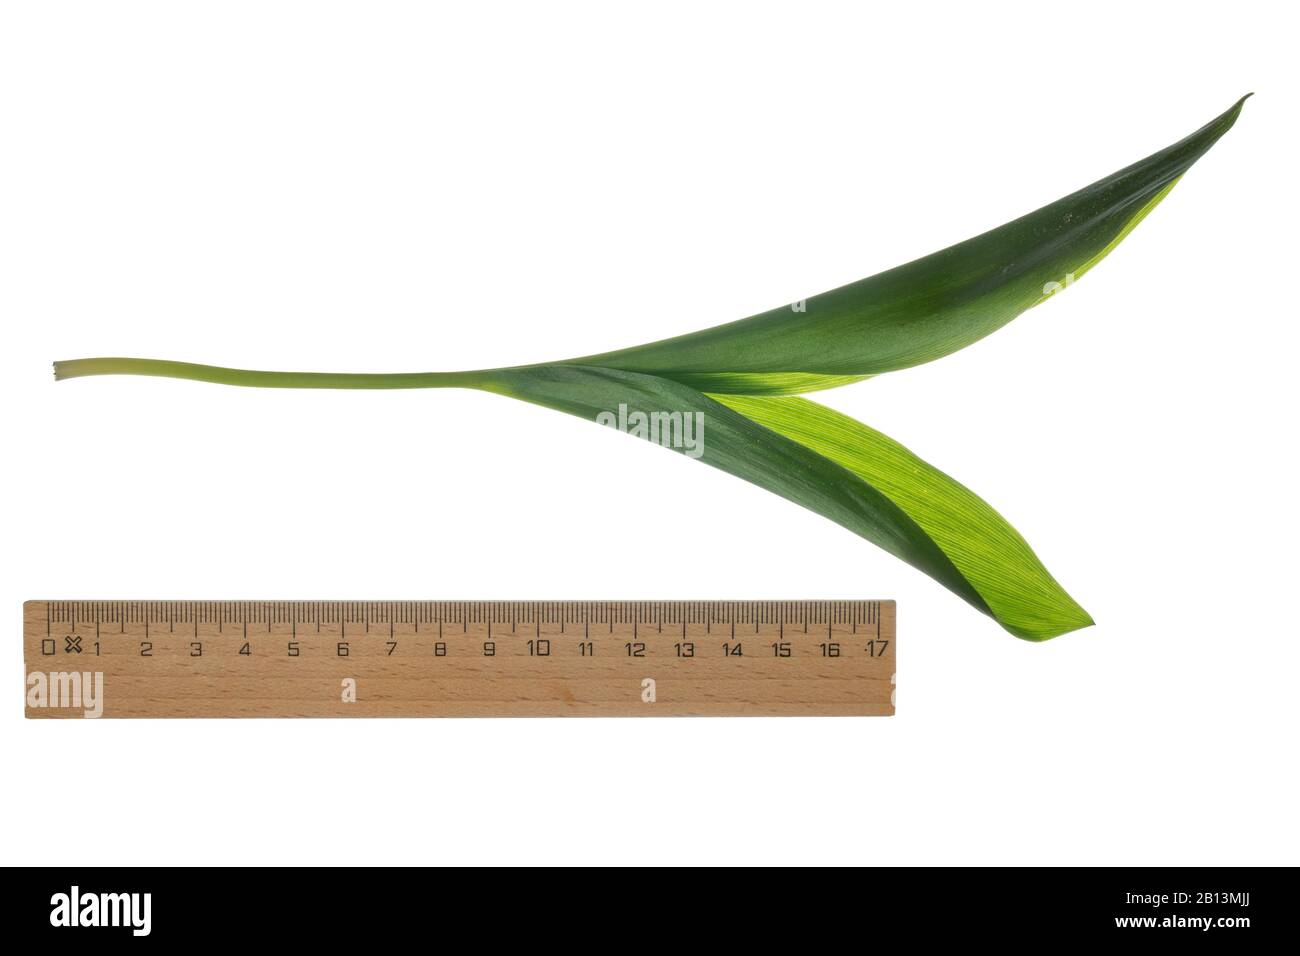 European lily-of-the-valley (Convallaria majalis), leaves, cutout with ruler, Germany Stock Photo